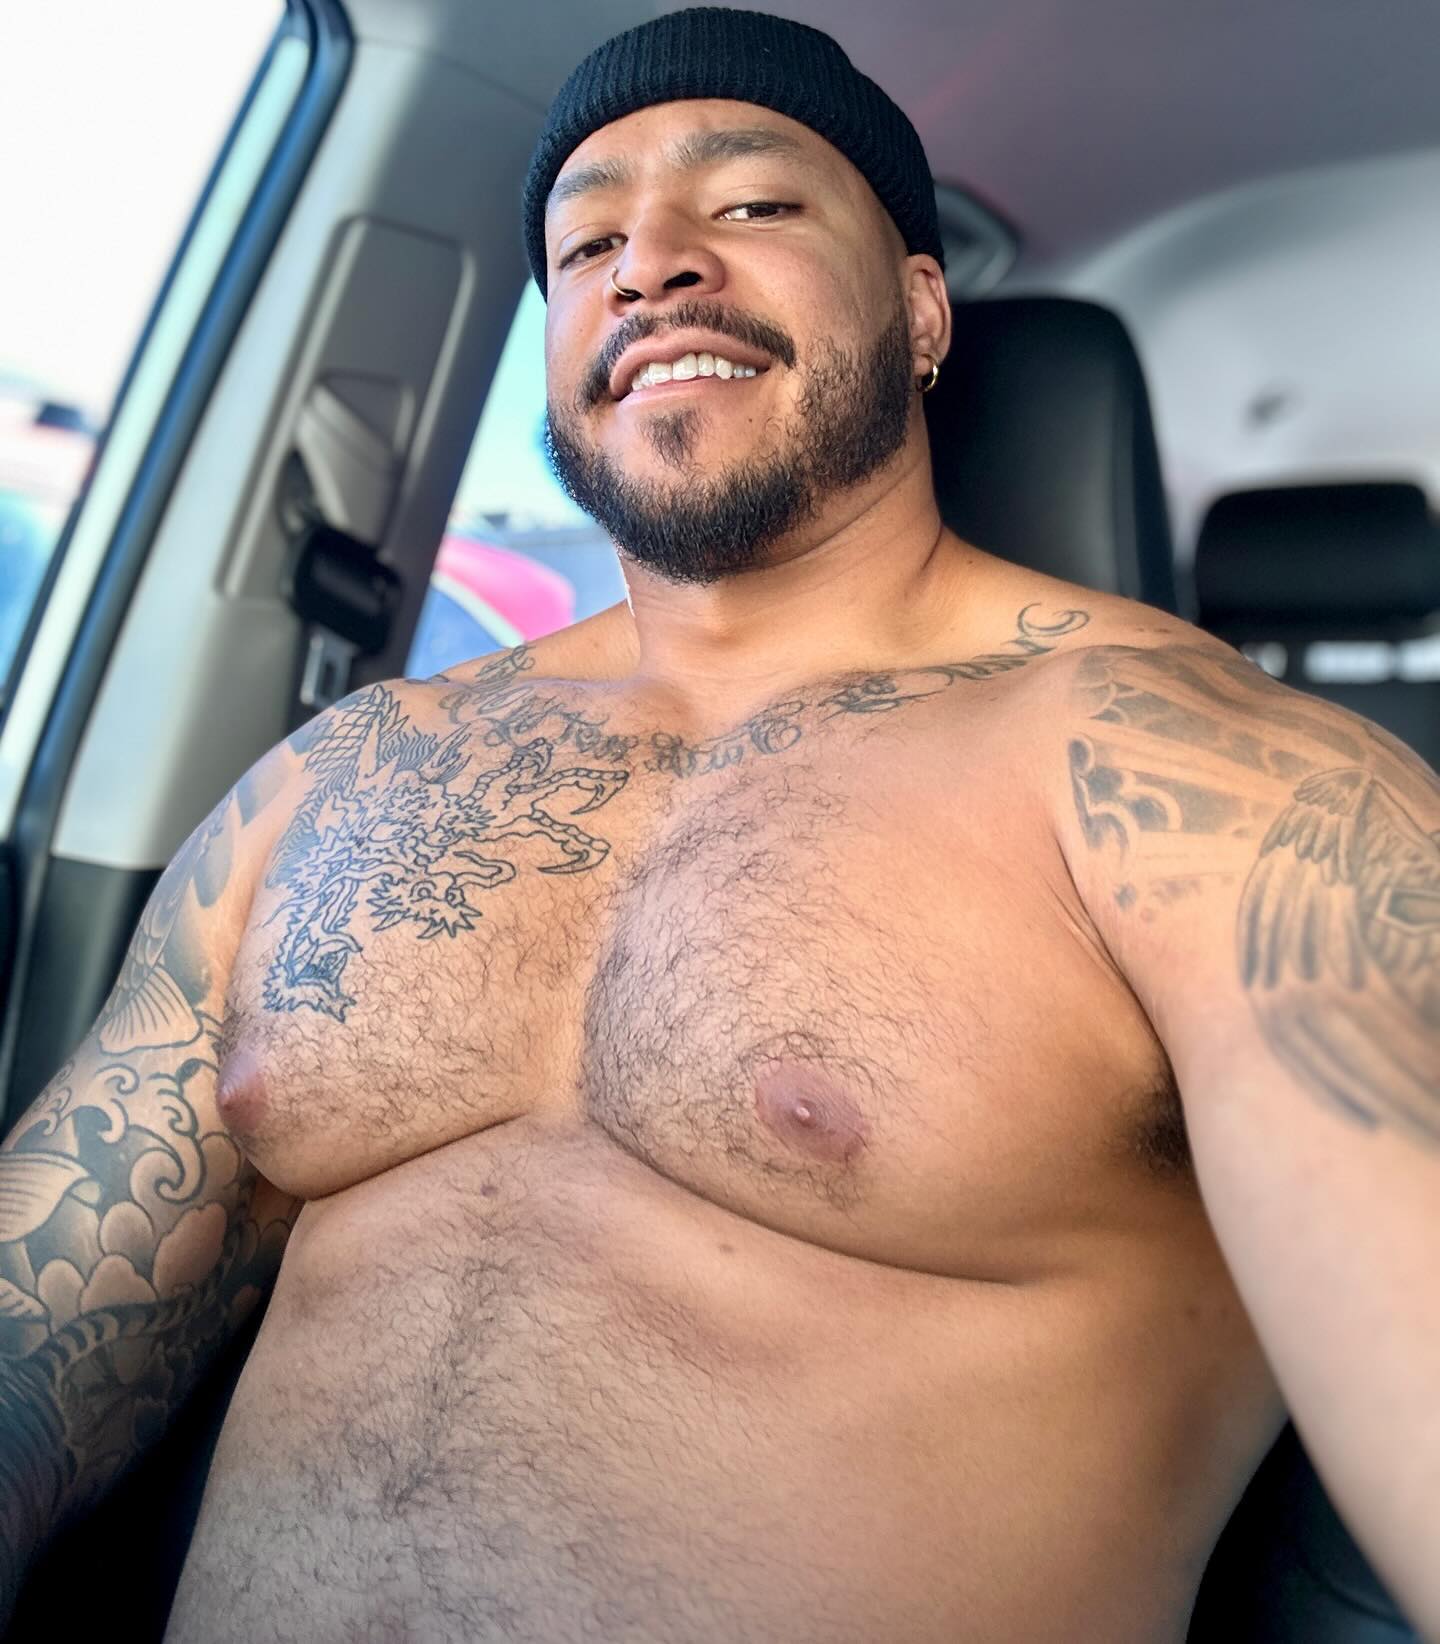 Starting the week off right with a great chest workout 😤

Surprisingly felt pretty strong today after that flu I got last week. We back in business 🙌🏽 Building one day at a time
Hope everyone has a great week!

LET’S KEEP MOVING!! 💯
•
•
•
#cheatday #monday #flex #biceps #muscle #personaltraining #personaltrainer #fitness #fitnessjourney #fitnessmotivation #fitfam #strength #goals #grind #consistency #positivity #mindset #work #musclebear #beast #beastmode #doublebicep #arms #back #chest #la #positivevibes